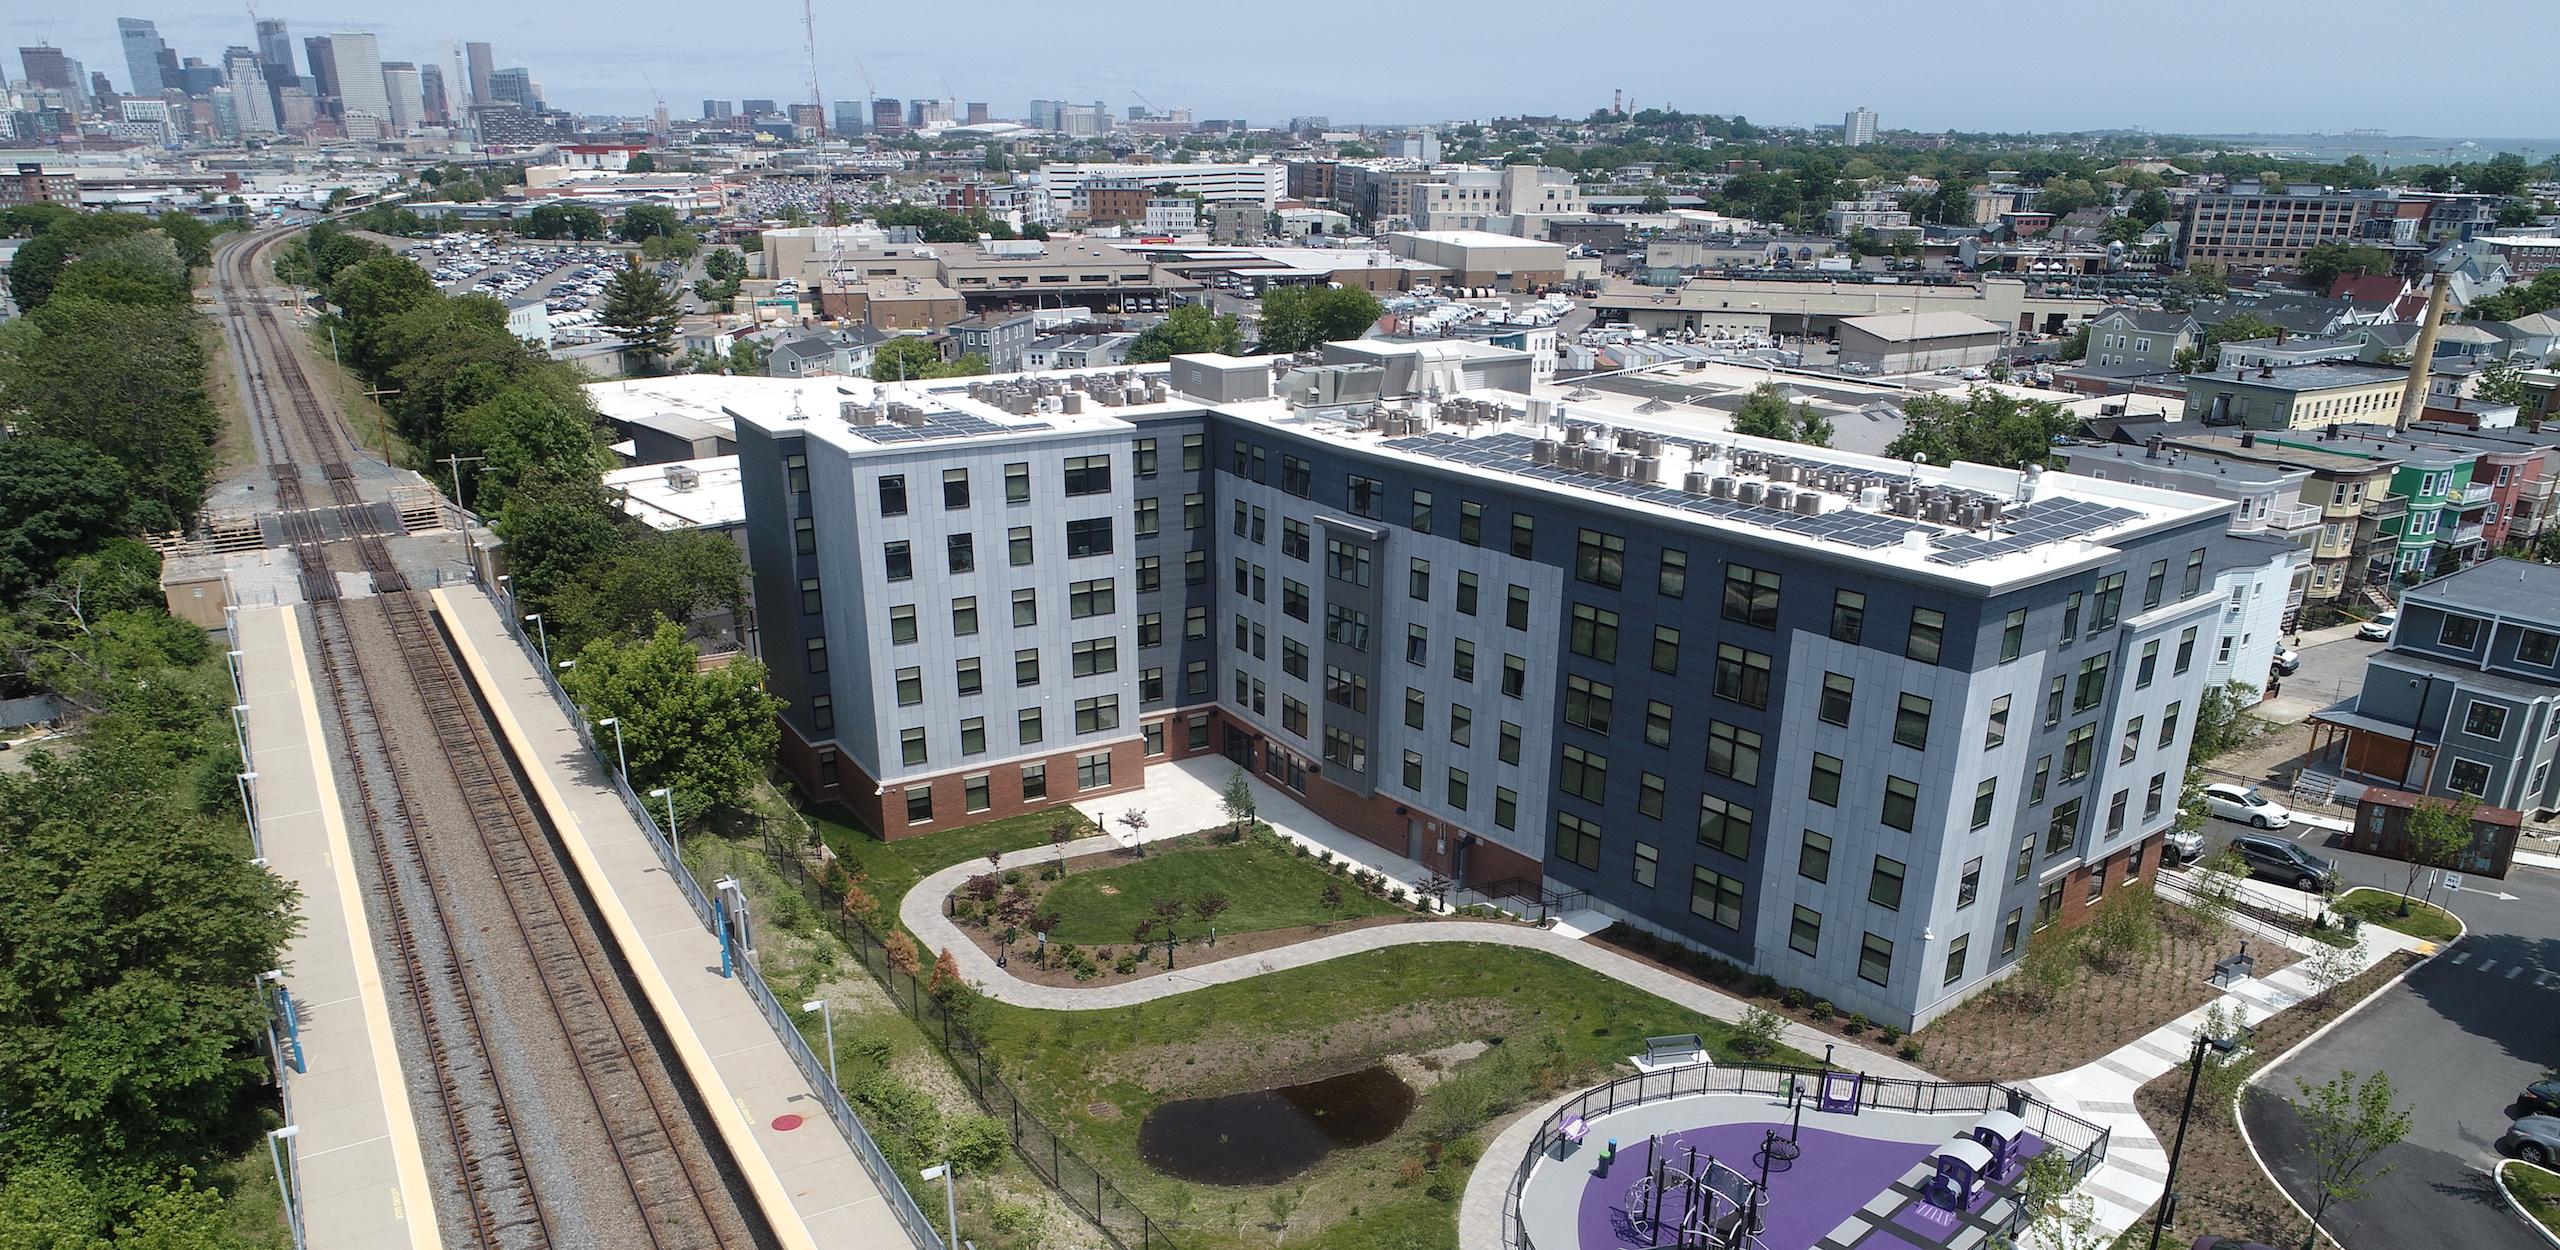 Bird's-eye view of residential building, playground and landscaping by adjacent commuter rail tracks.